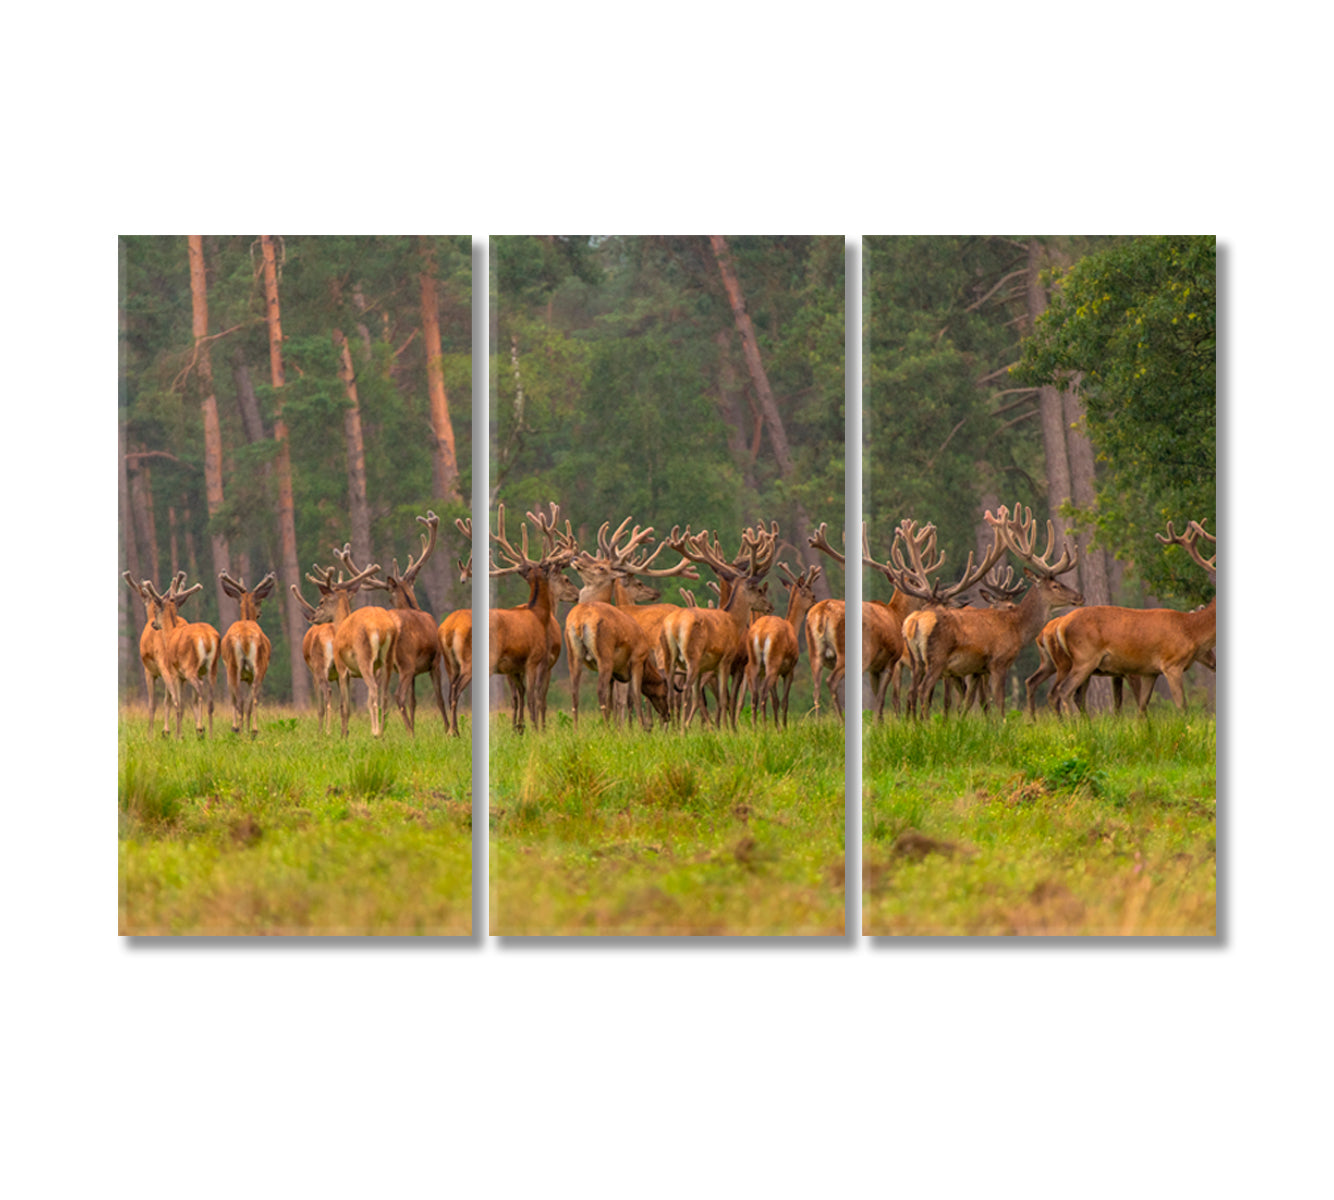 Group of Red Deers in Forest Canvas Print-Canvas Print-CetArt-3 Panels-36x24 inches-CetArt